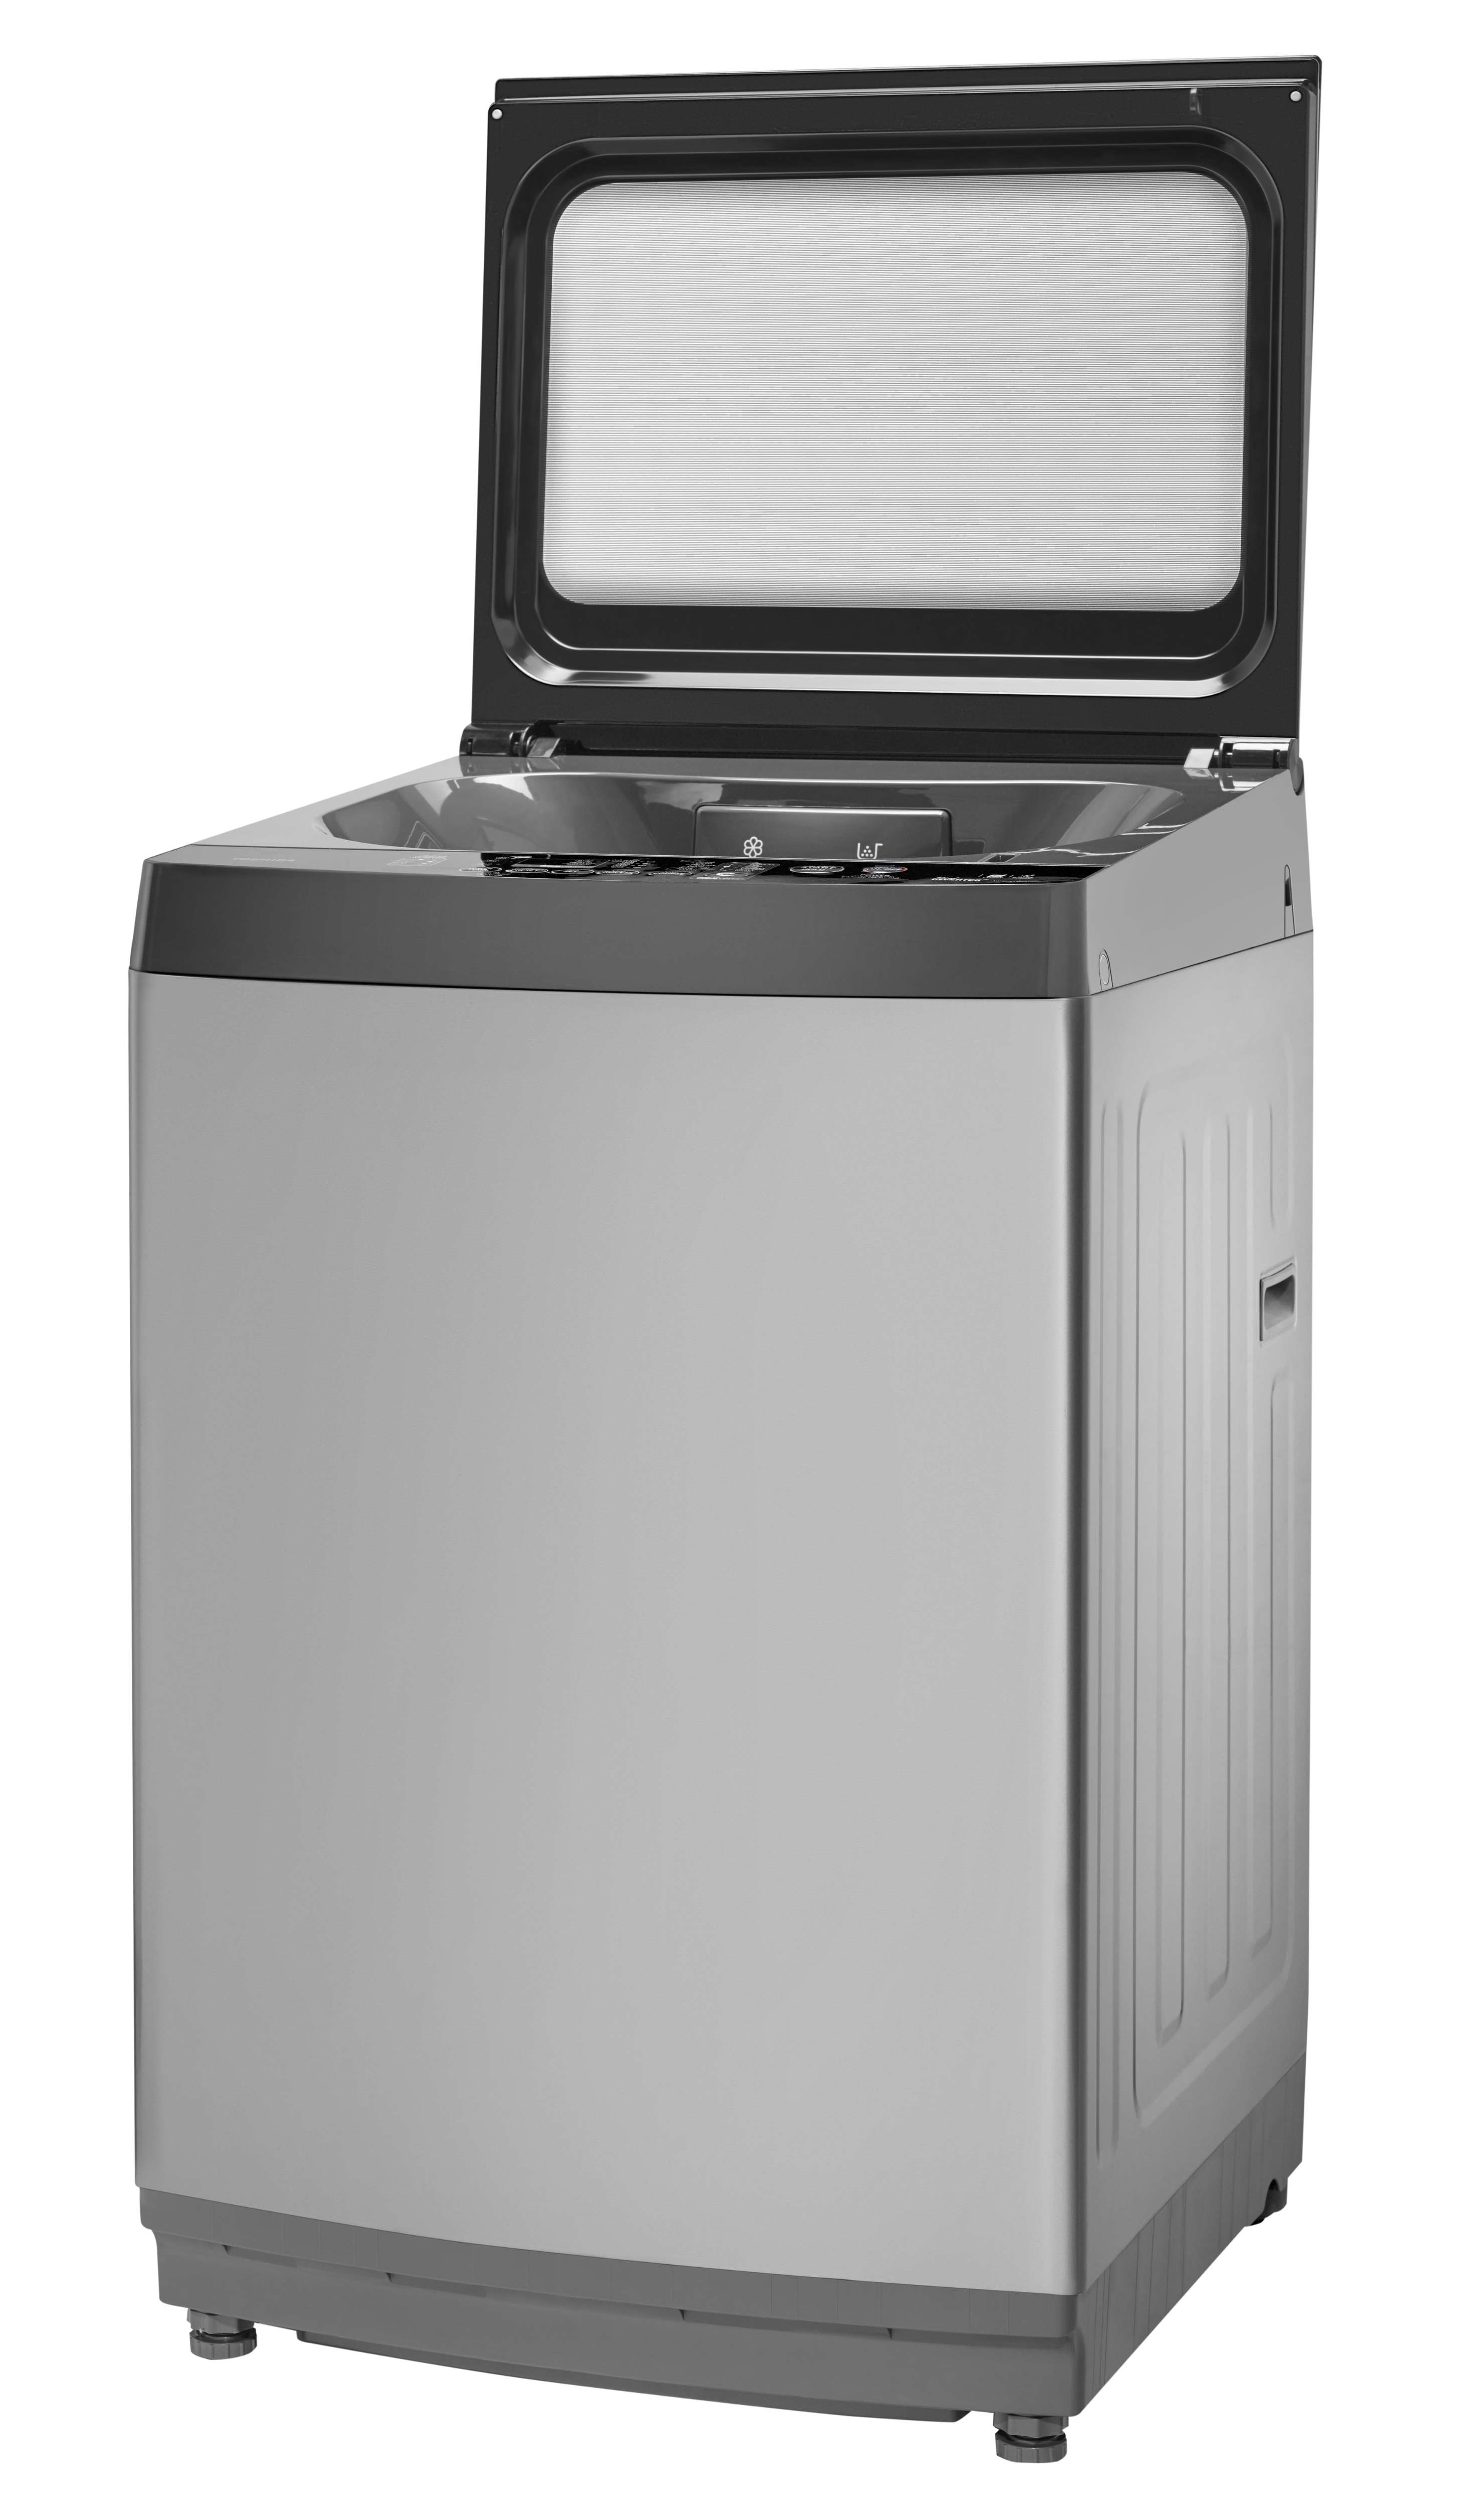  Top Load Washer with Fragrance Course